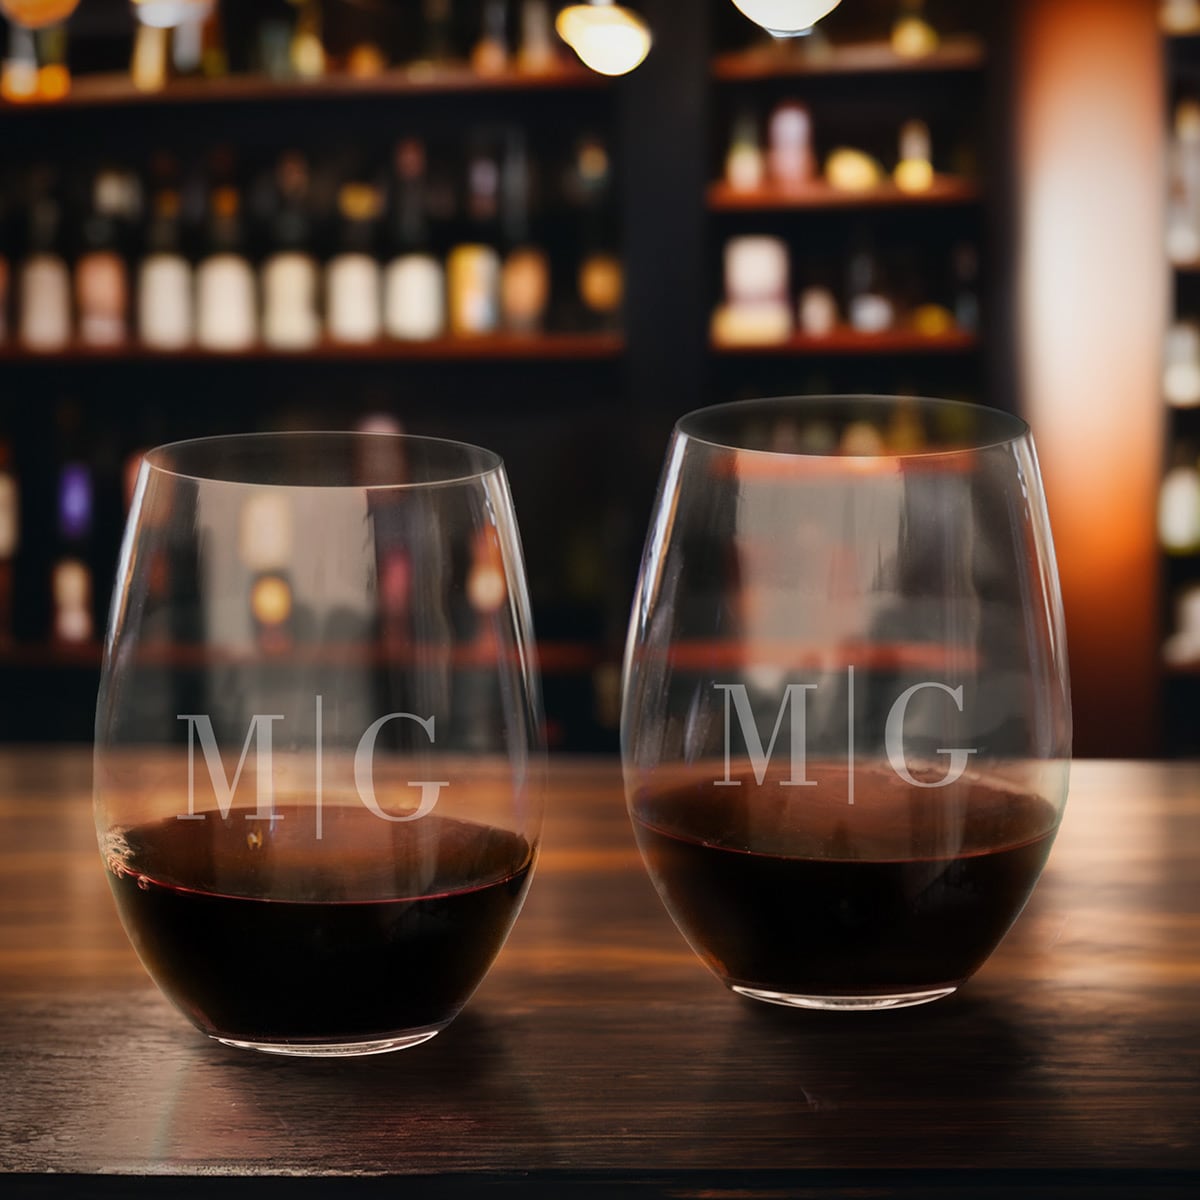 Personalized Stemless Riedel Wine Glasses, Cabernet/Merlot - Set of 2